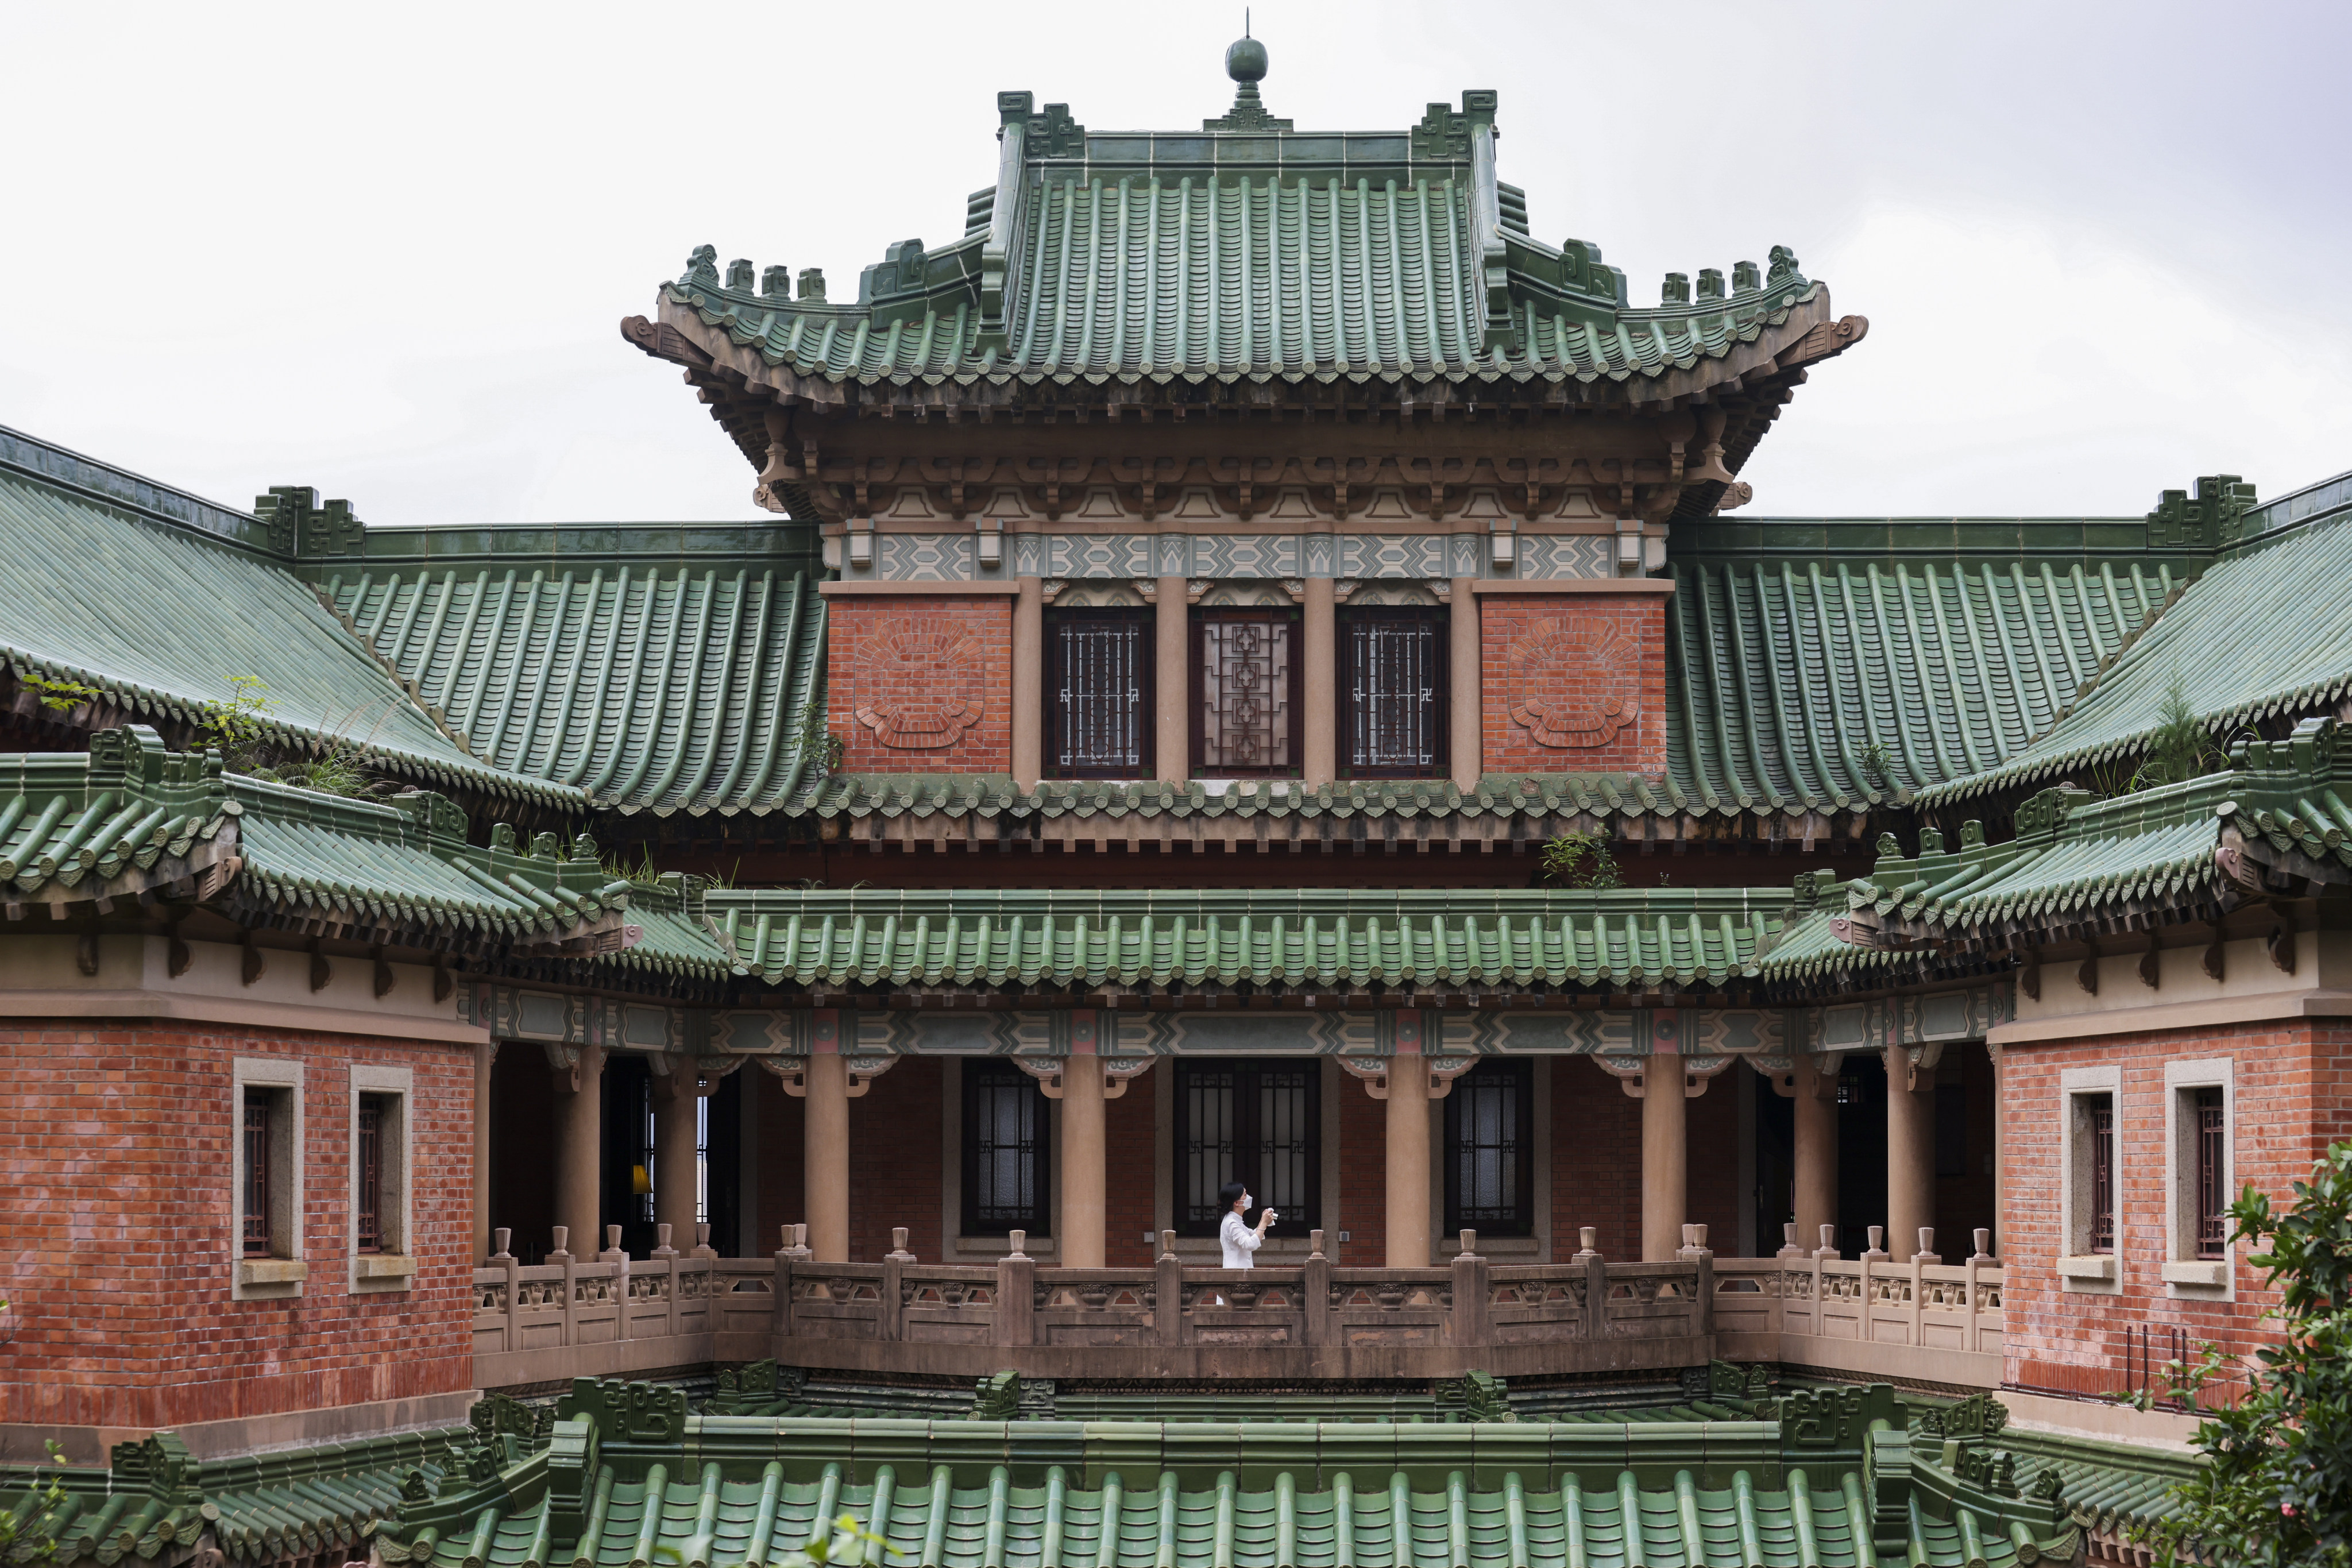 The restoration of King Yin Lei mansion in Hong Kong’s Mid-levels employed green-glazed Canton-glaze tiles and other decorative elements, but although sourced from the same place, their quality does not match that of original elements used when it was built in the 1930s. Photo: Nora Tam